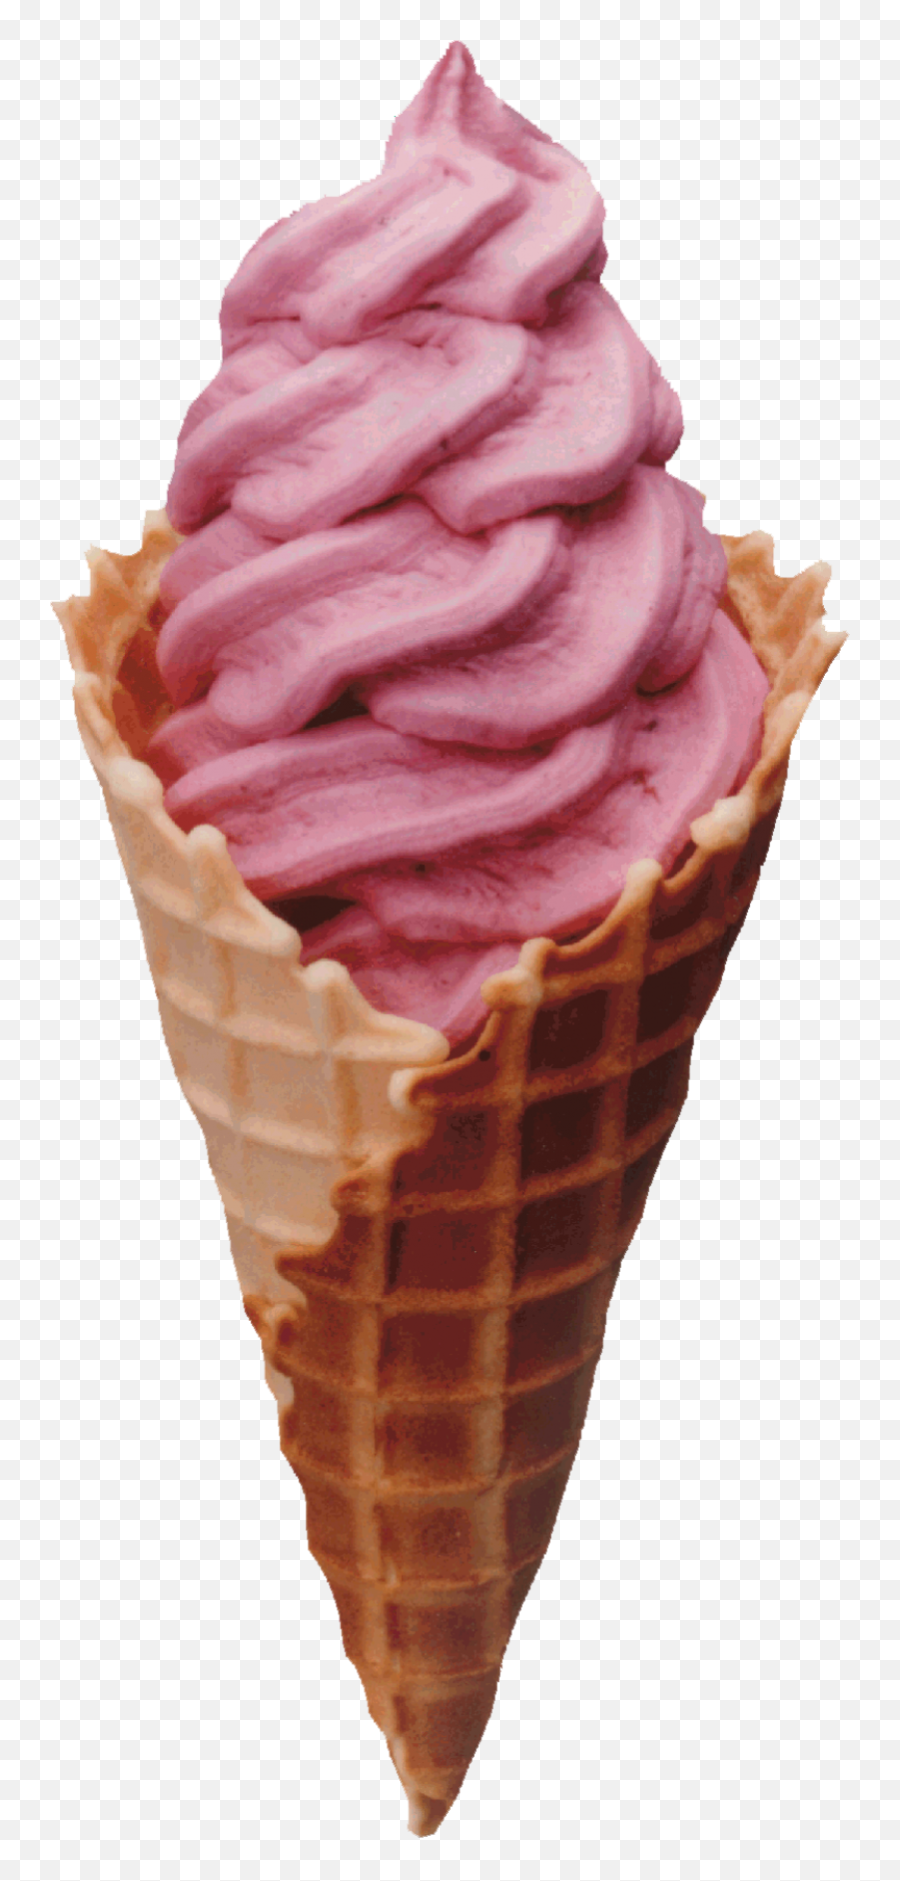 Download Ice Cream Png Image For Free - Soft Serve Waffle Cone,Ice Cream Transparent